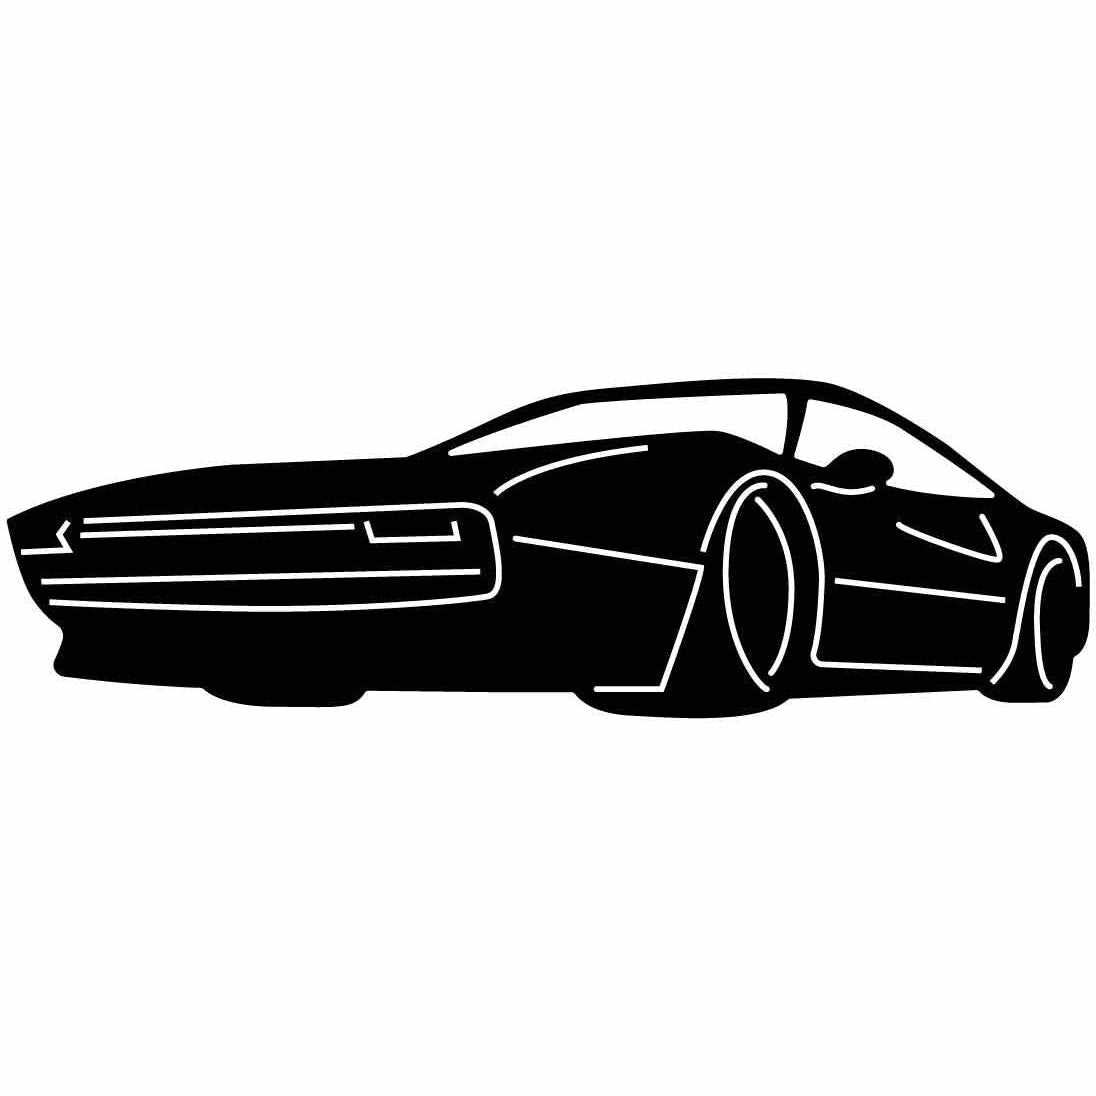 Old Muscle Car Free-DXF files cut ready for CNC-DXFforCNC.com